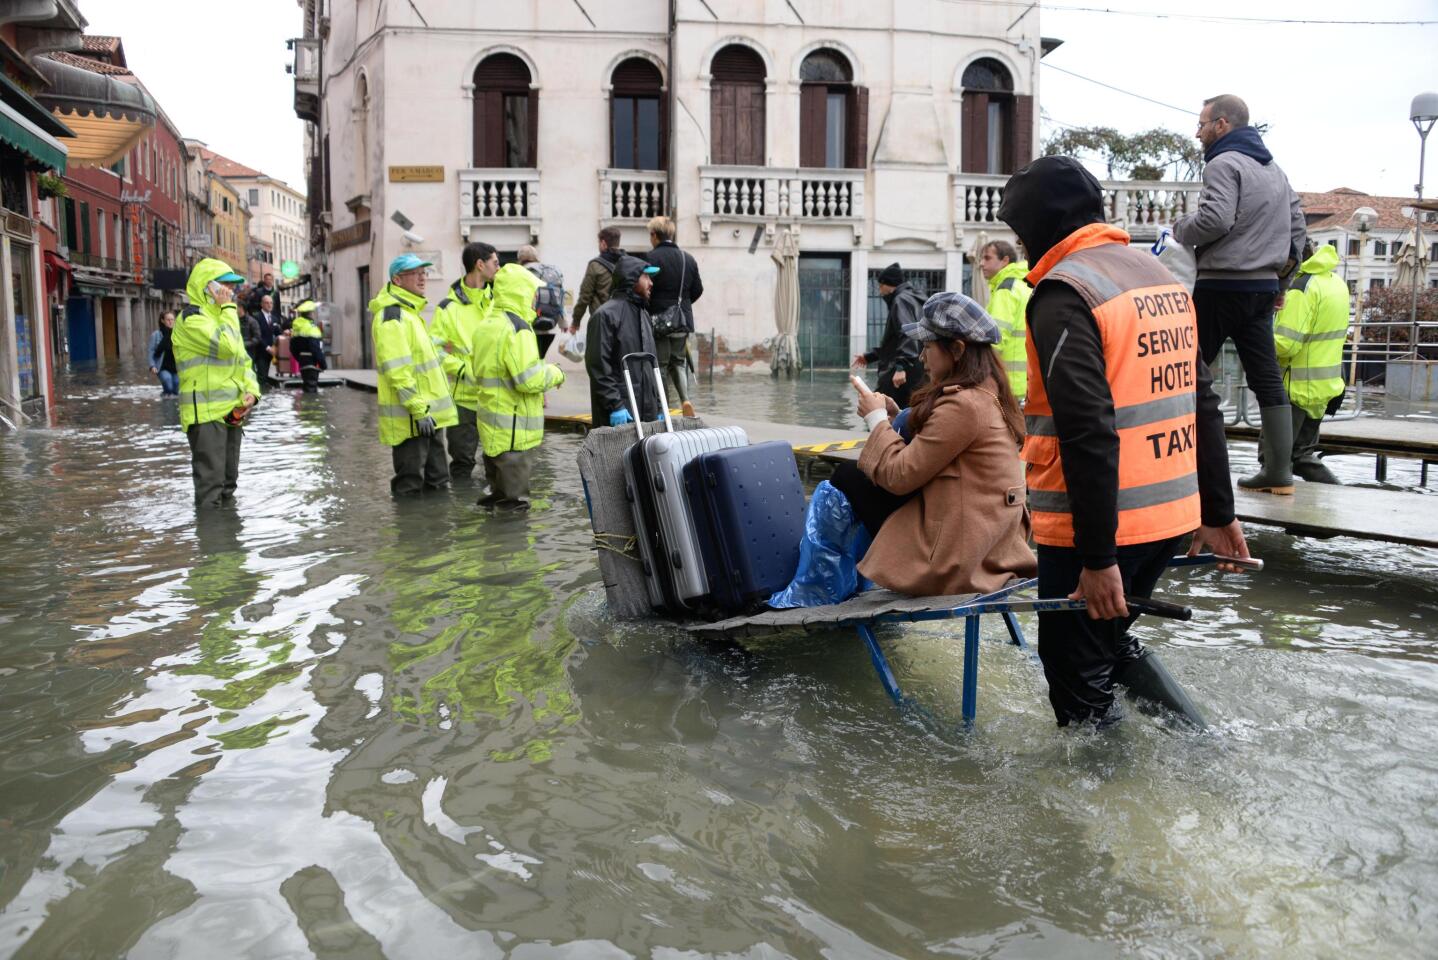 People wade through high water in Venice.